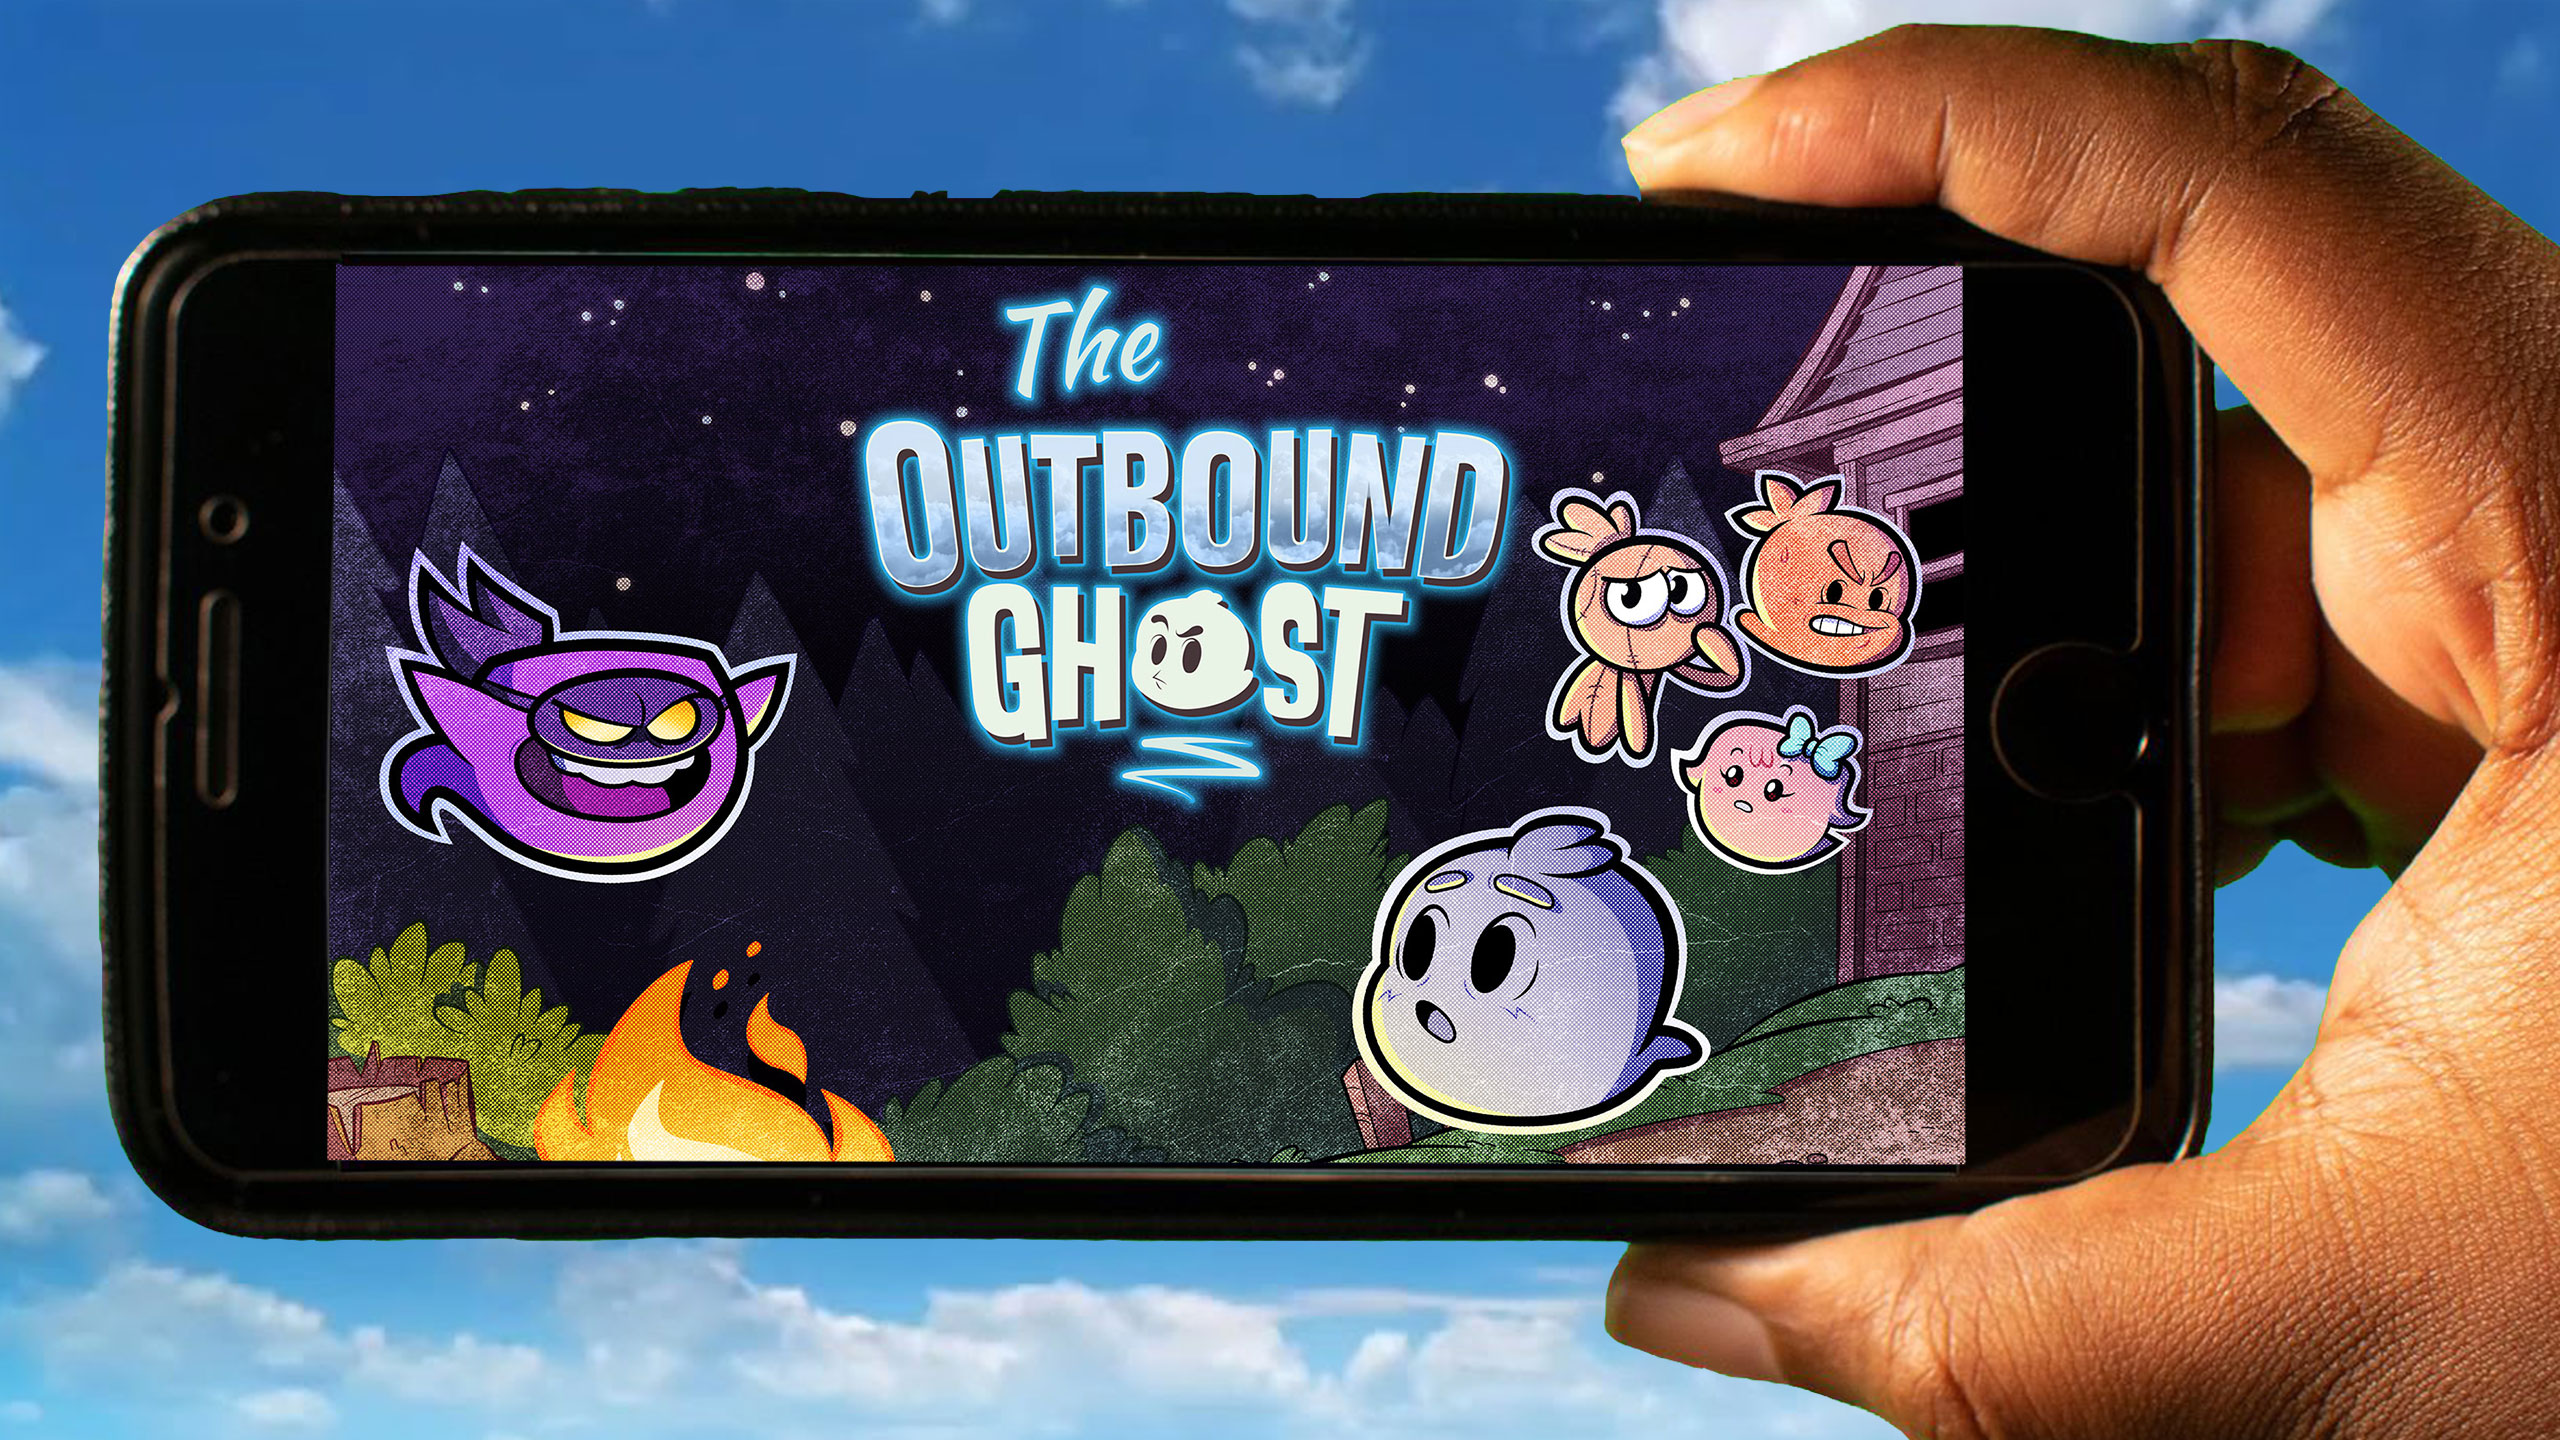 The Outbound Ghost download the new